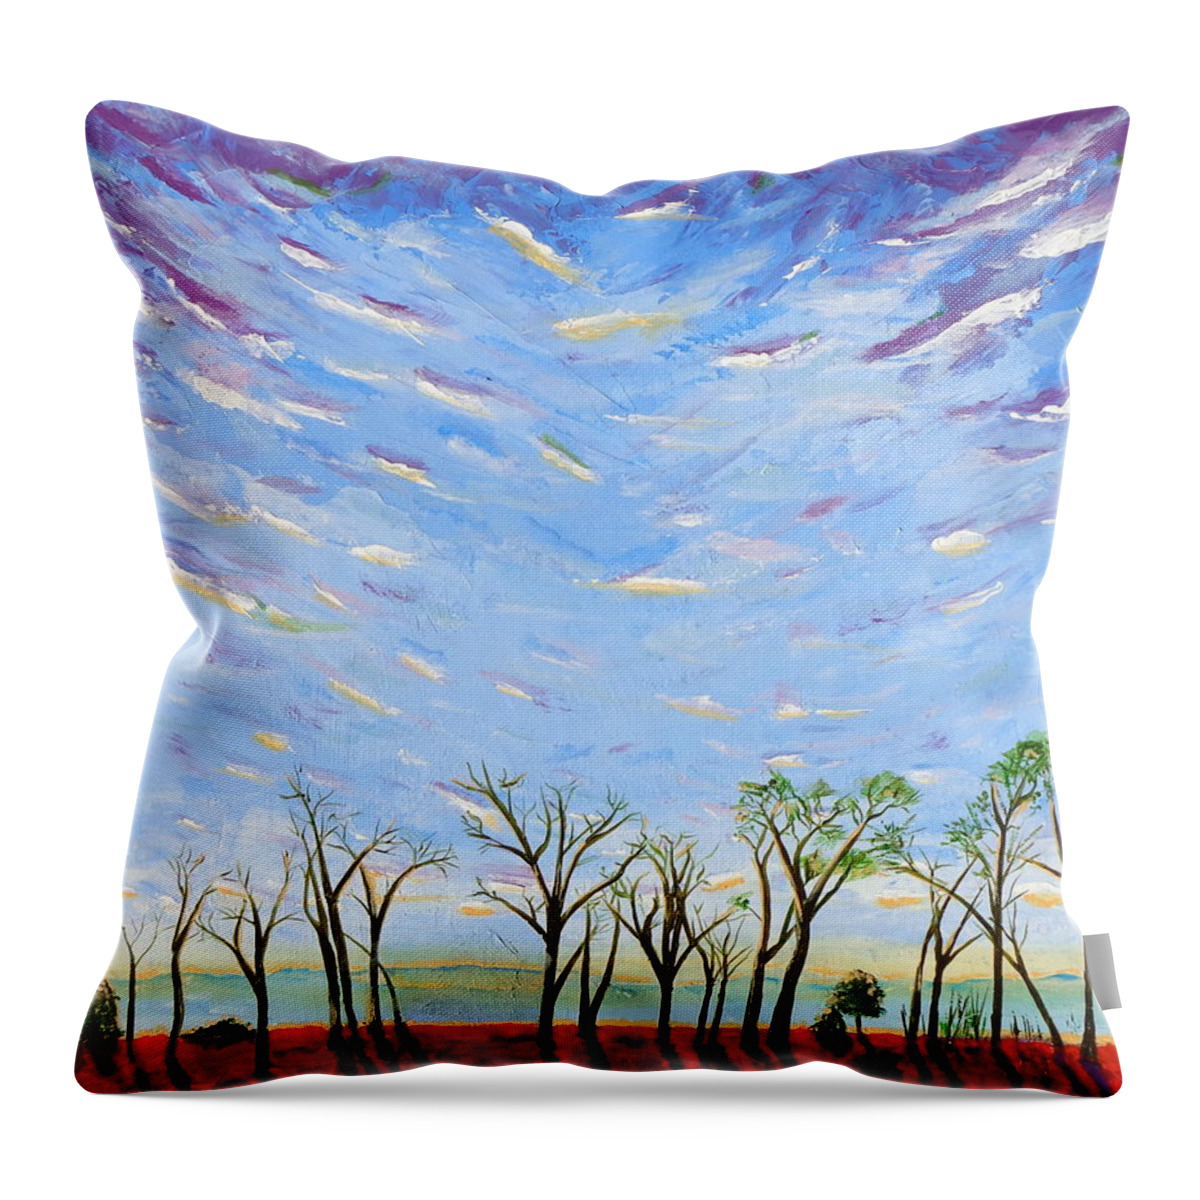 Sky Throw Pillow featuring the painting Whimsical Sky by Deborah Naves